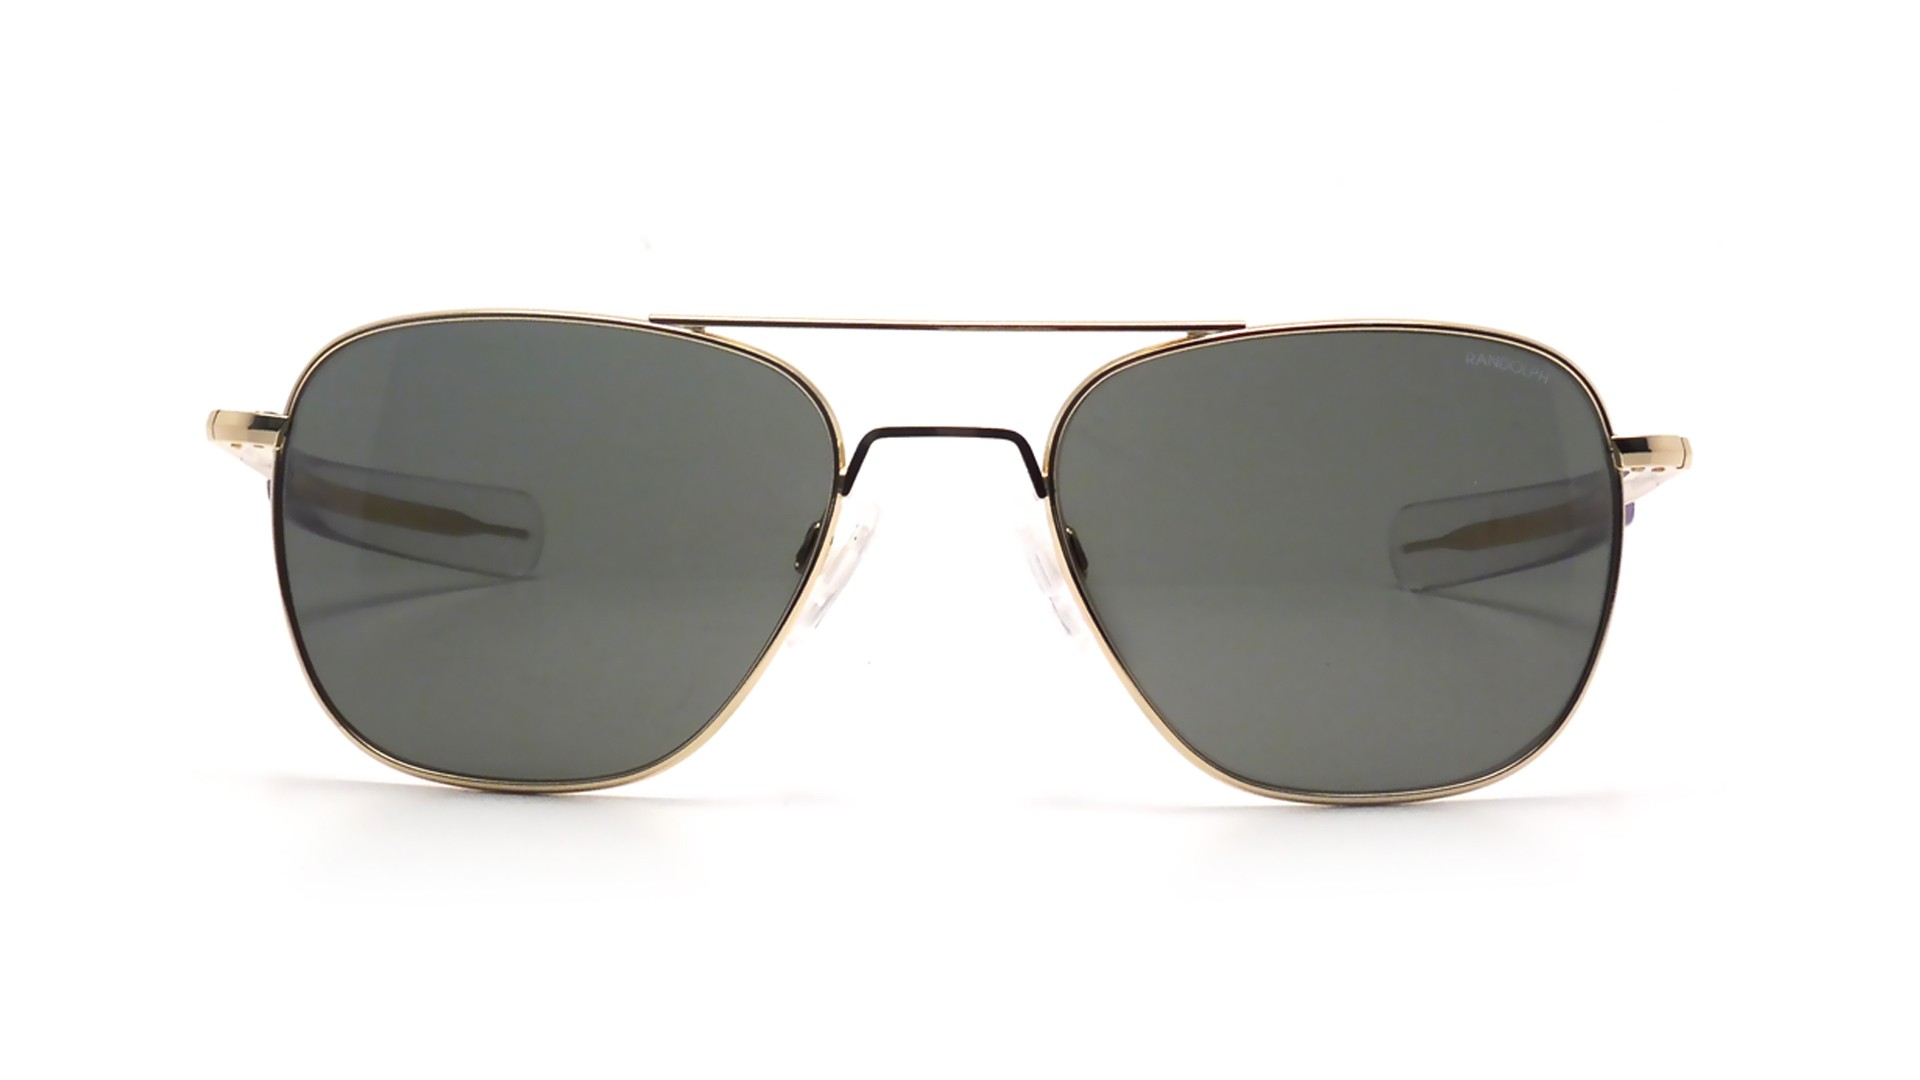 Sunglasses Randolph Aviator Gold AF005 23K 52-20 Small in stock | Price ...